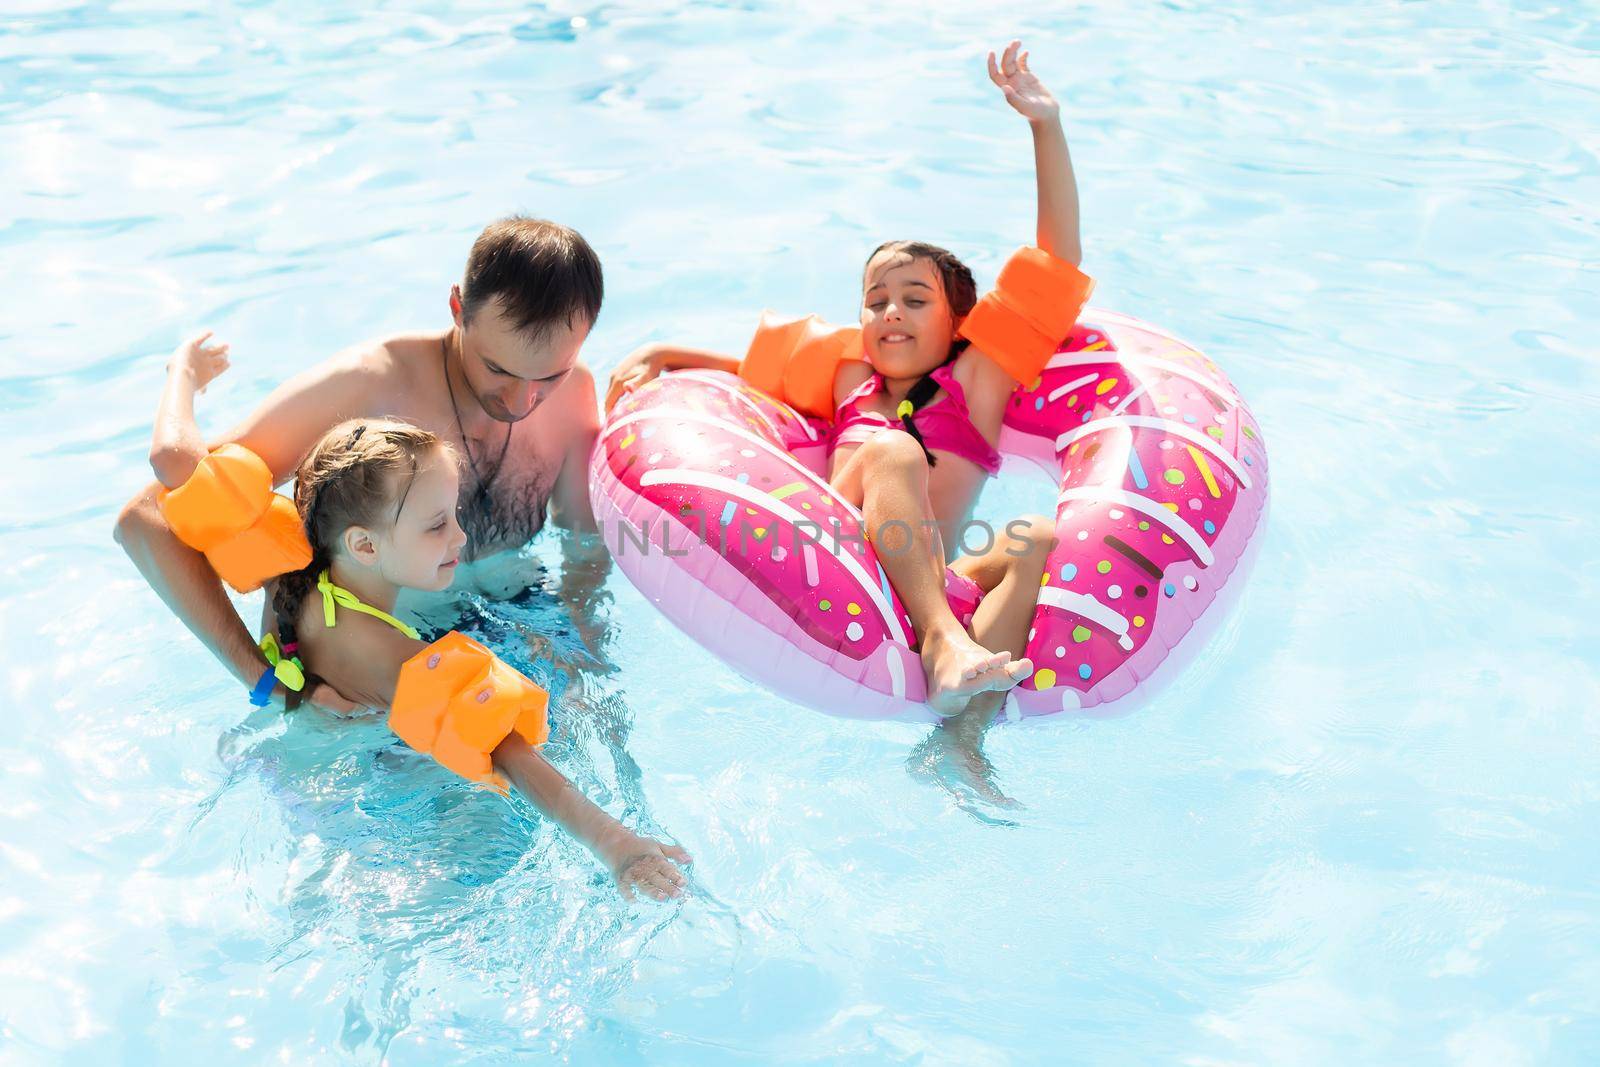 Happy family having fun on summer vacation, playing in swimming pool. Active healthy lifestyle concept.